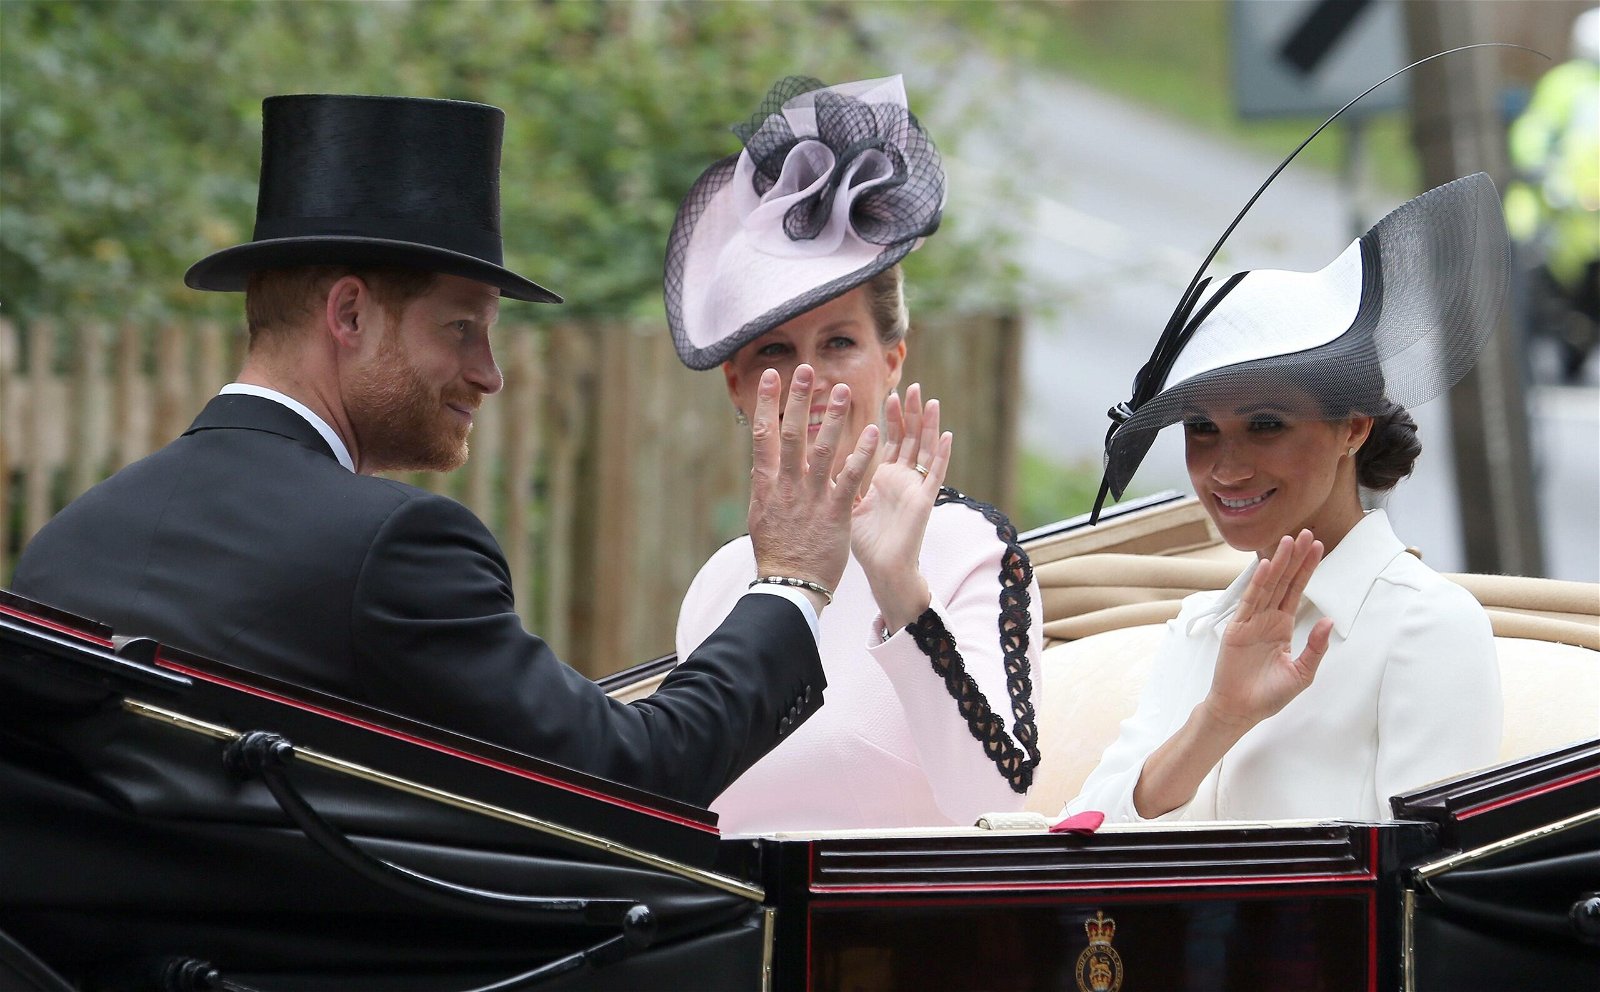 Meghan Markle in carriage for royal ascot debut